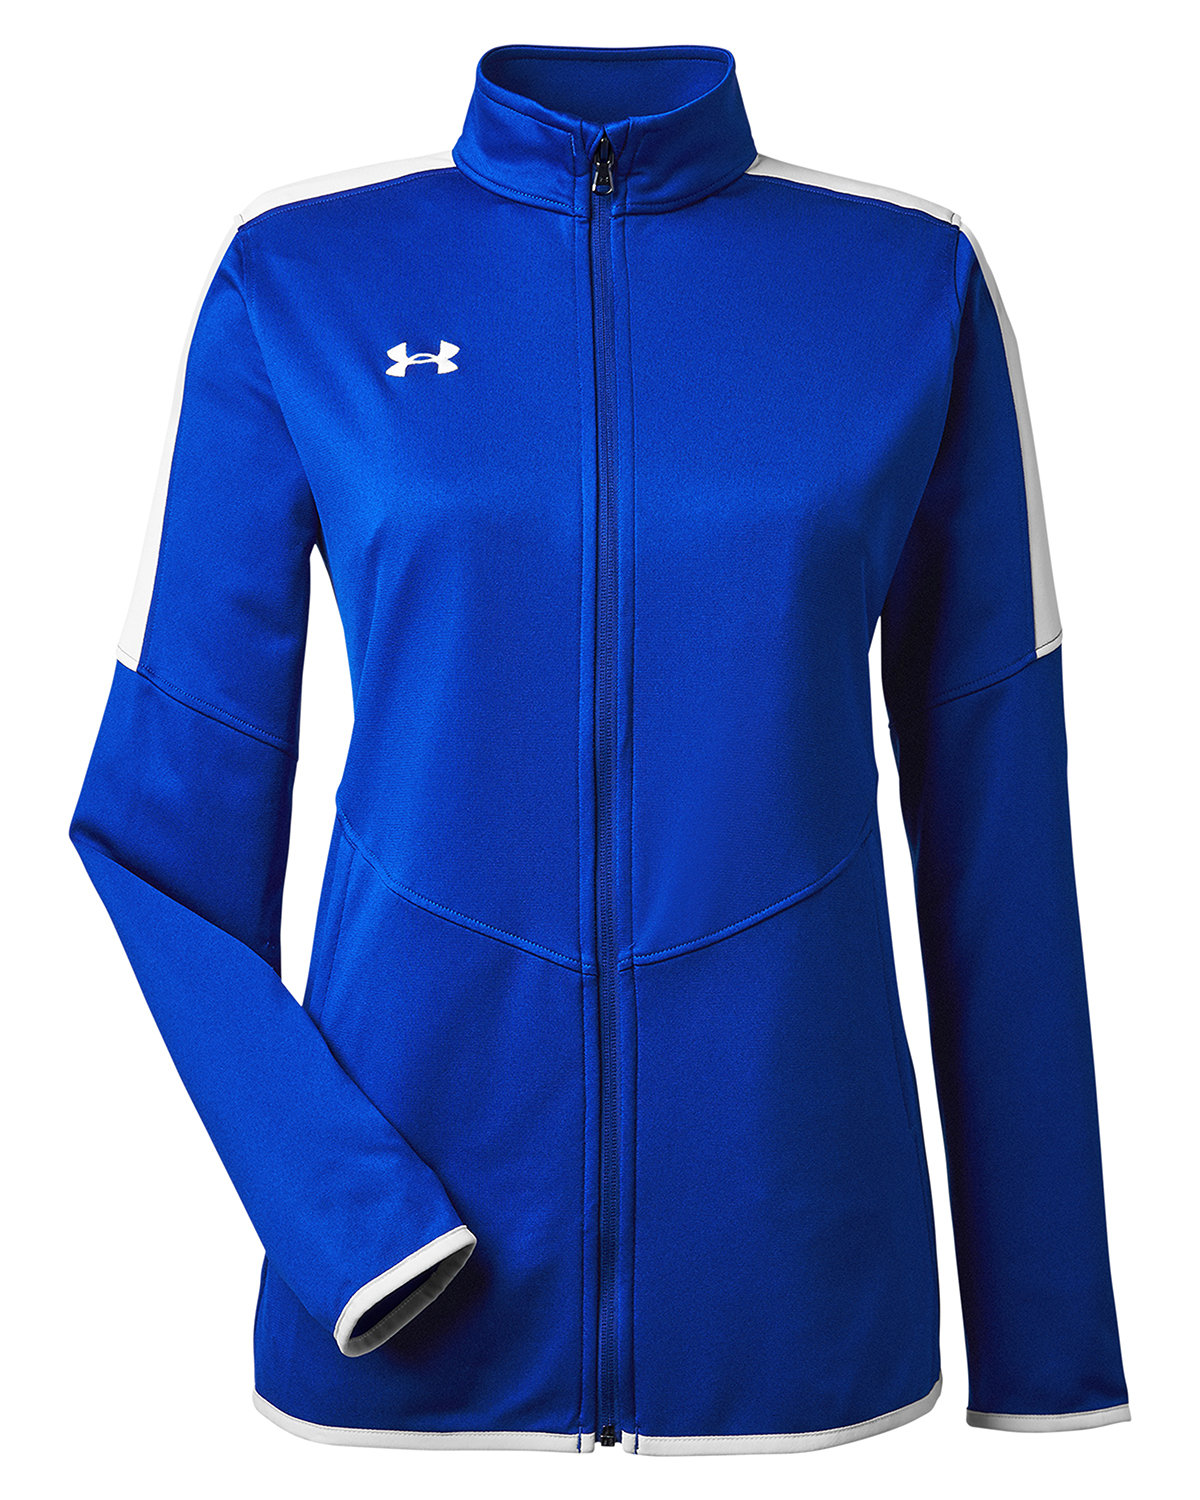 Branded Under Armour Ladies’ Rival Knit Jacket Royal